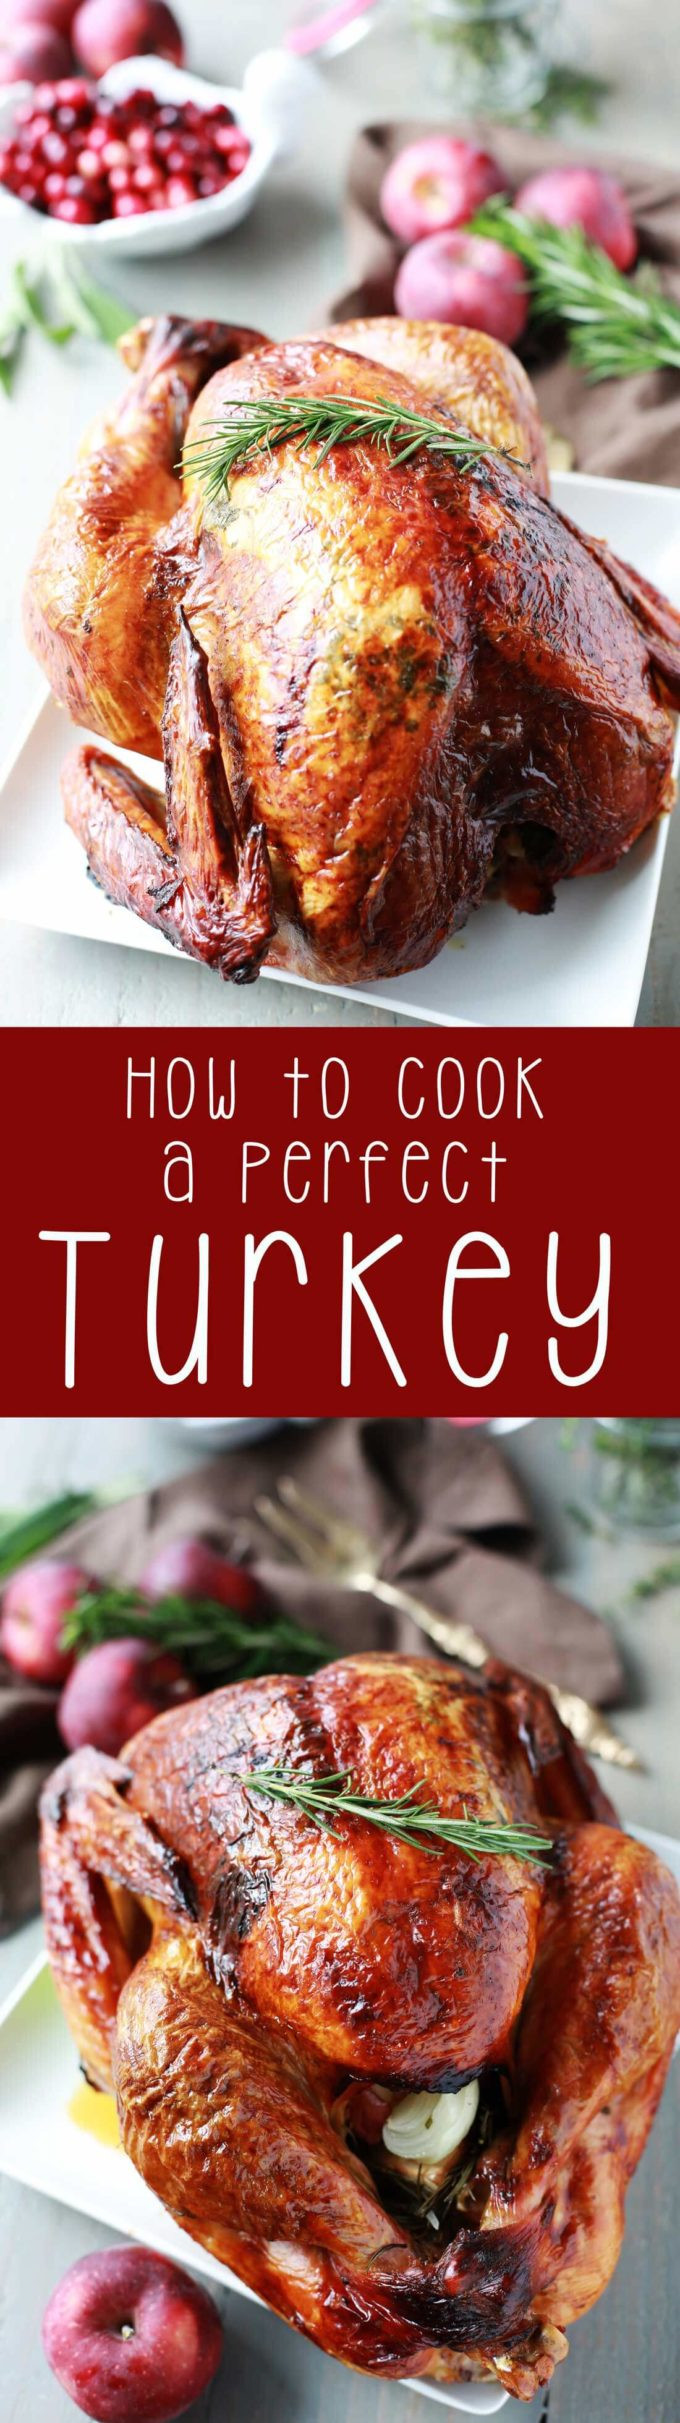 Prepare Turkey For Thanksgiving
 How to Cook a Perfect Turkey Eazy Peazy Mealz